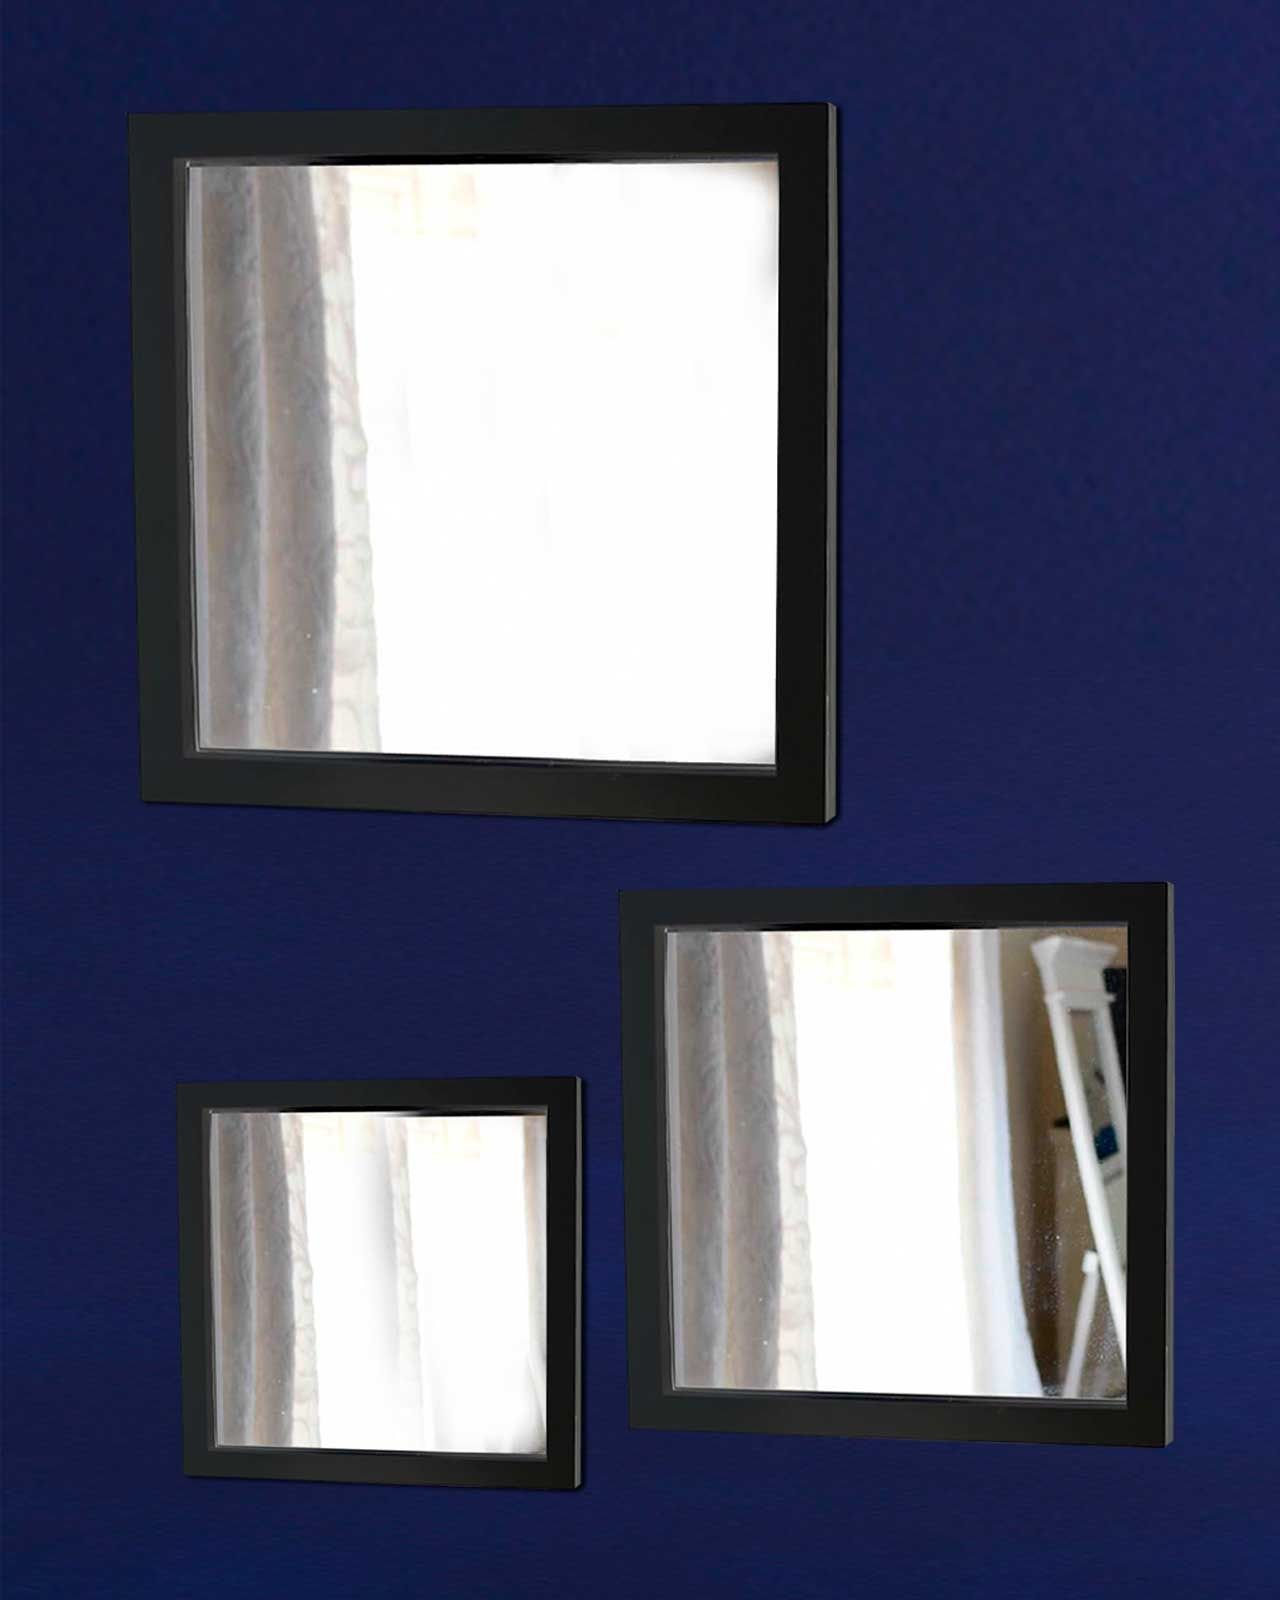 Set Of 3 Square Mirrors, Black | Ebay Throughout Black Square Wall Mirrors (View 5 of 15)